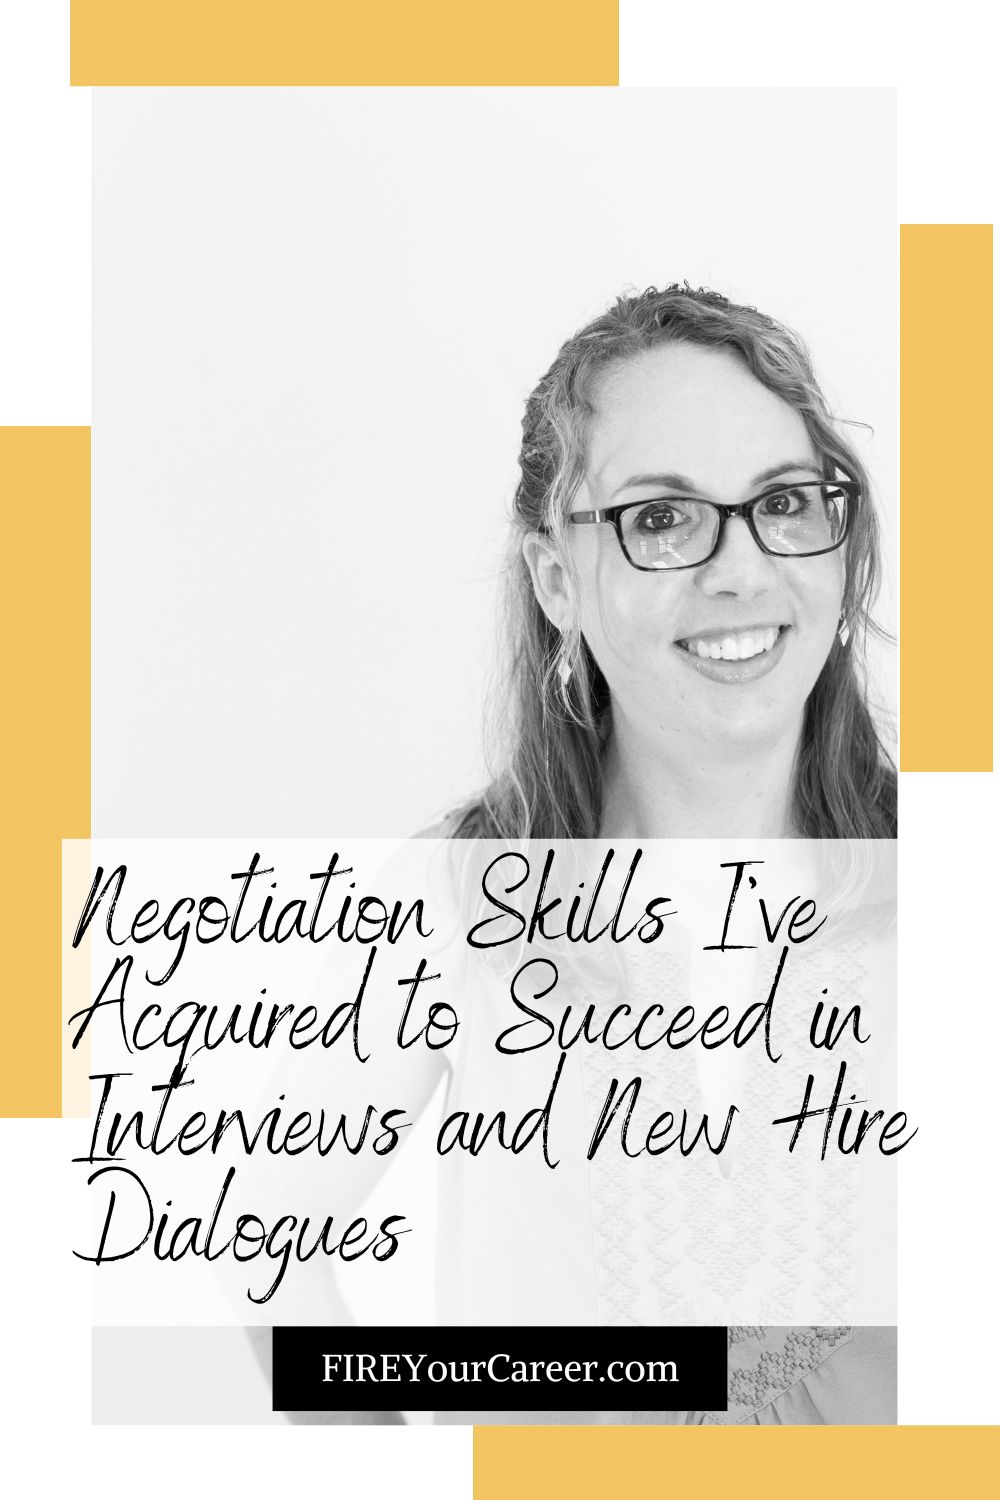 Negotiation Skills I've Acquired to Succeed in Interviews and New Hire Dialogues Pinterest